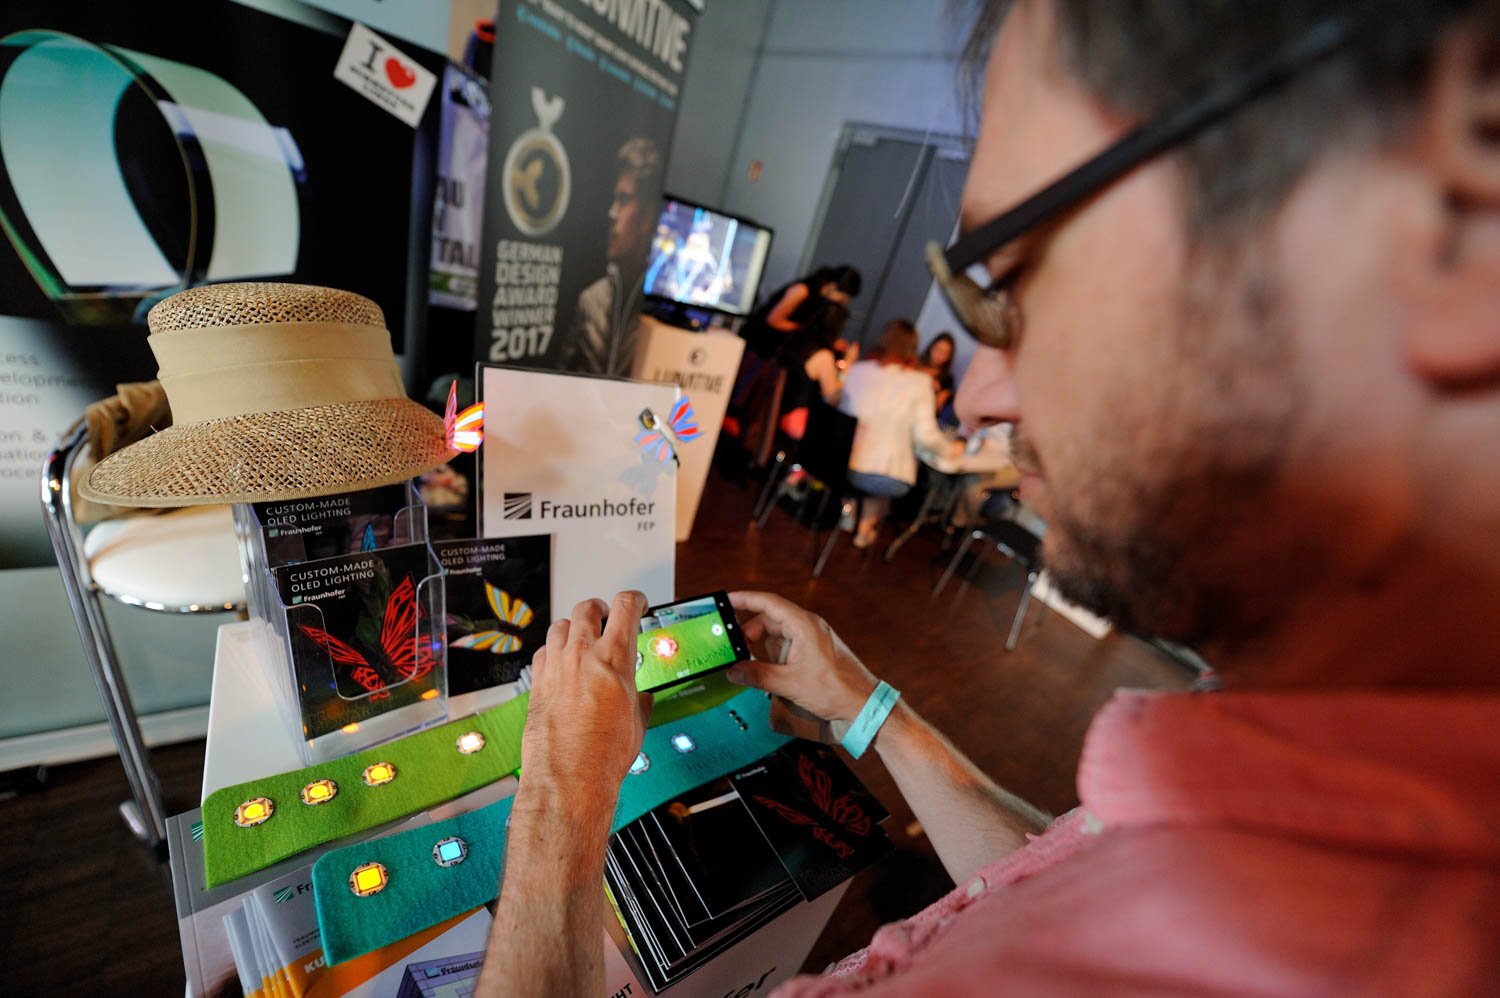 Jan Hesse (Fraunhofer FEP) demoing organic LEDs at the Exhibition Hall at the Wear It Festival - The Conference on Wearables, fashion tech, smart clothing and consumer innovation on 19-20 June 2018 at the Kulturbrauerei Berlin - (c) Wear It Berlin / Michael Wittig, Berlin